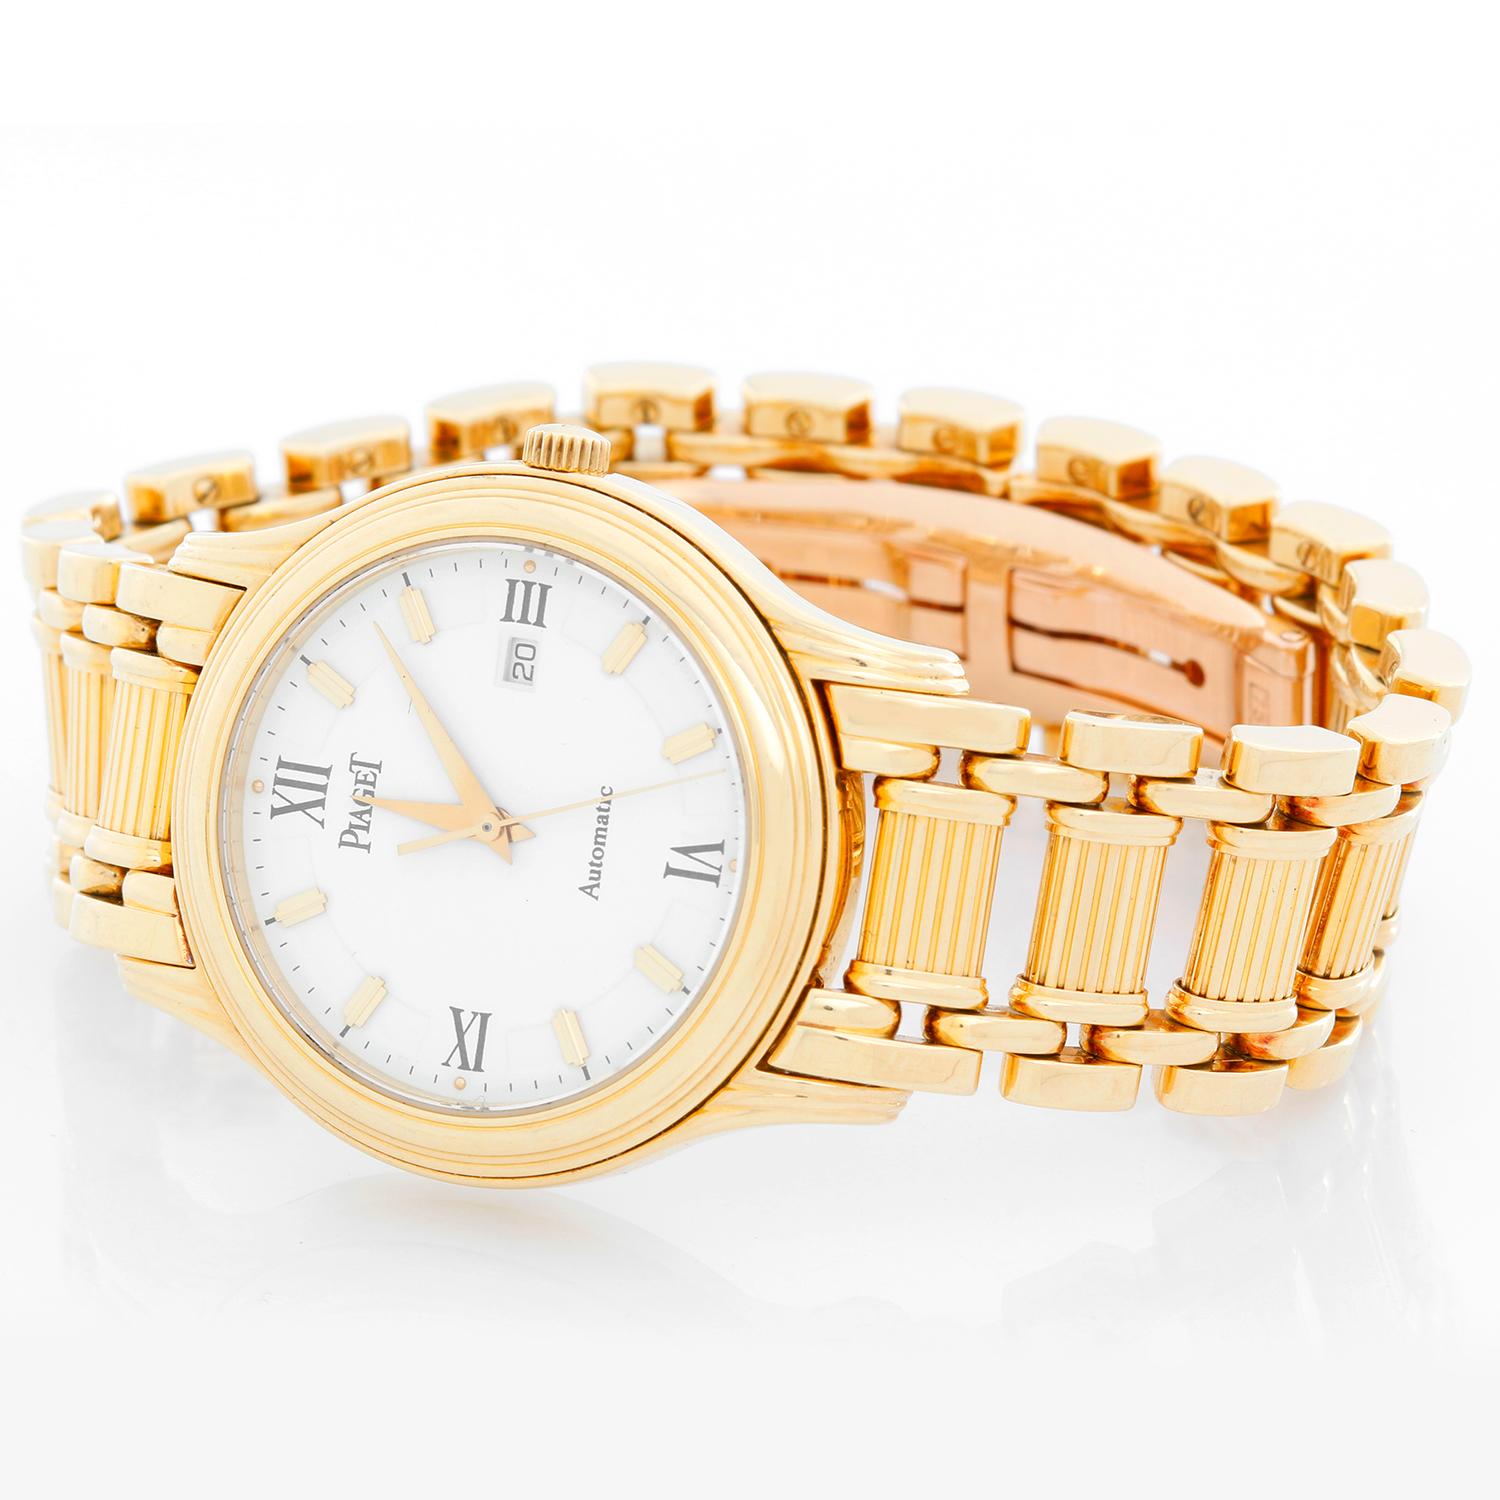 Piaget Polo 18K Yellow Gold Midsize Watch - Quartz. 18K Yellow gold ( 33  mm ). White dial with gold markers and black Roman numerals. 18K Yellow Gold Piaget Bracelet with 18K Yellow gold deployant clasp. Pre-owned with custom box.